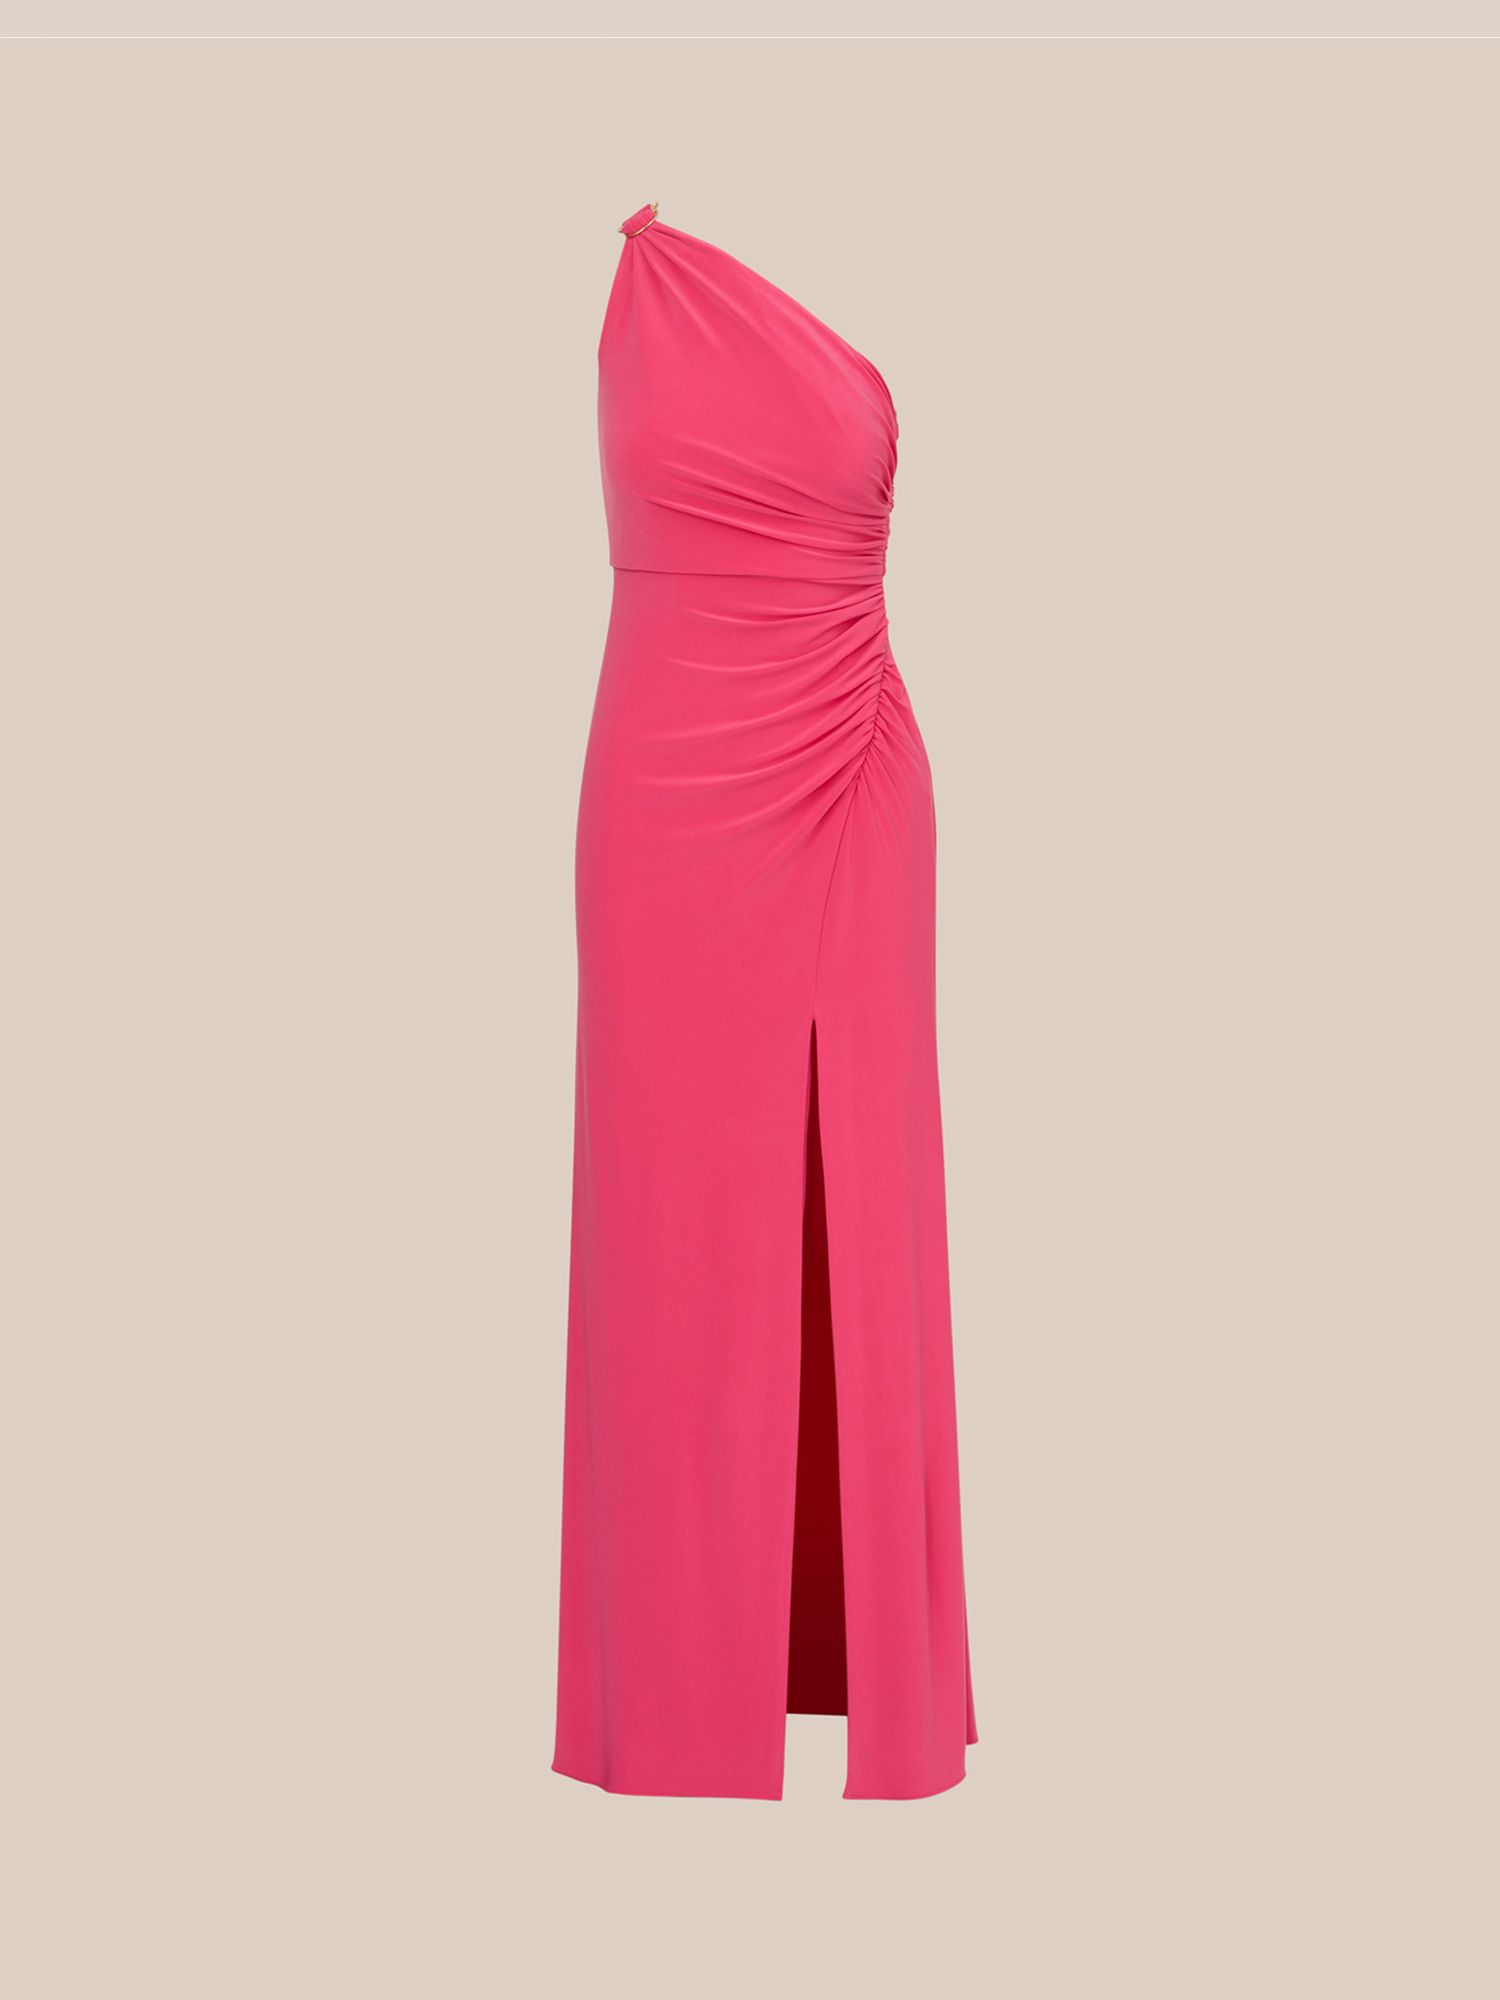 Adrianna Papell One Shoulder Gown Dress, Pink